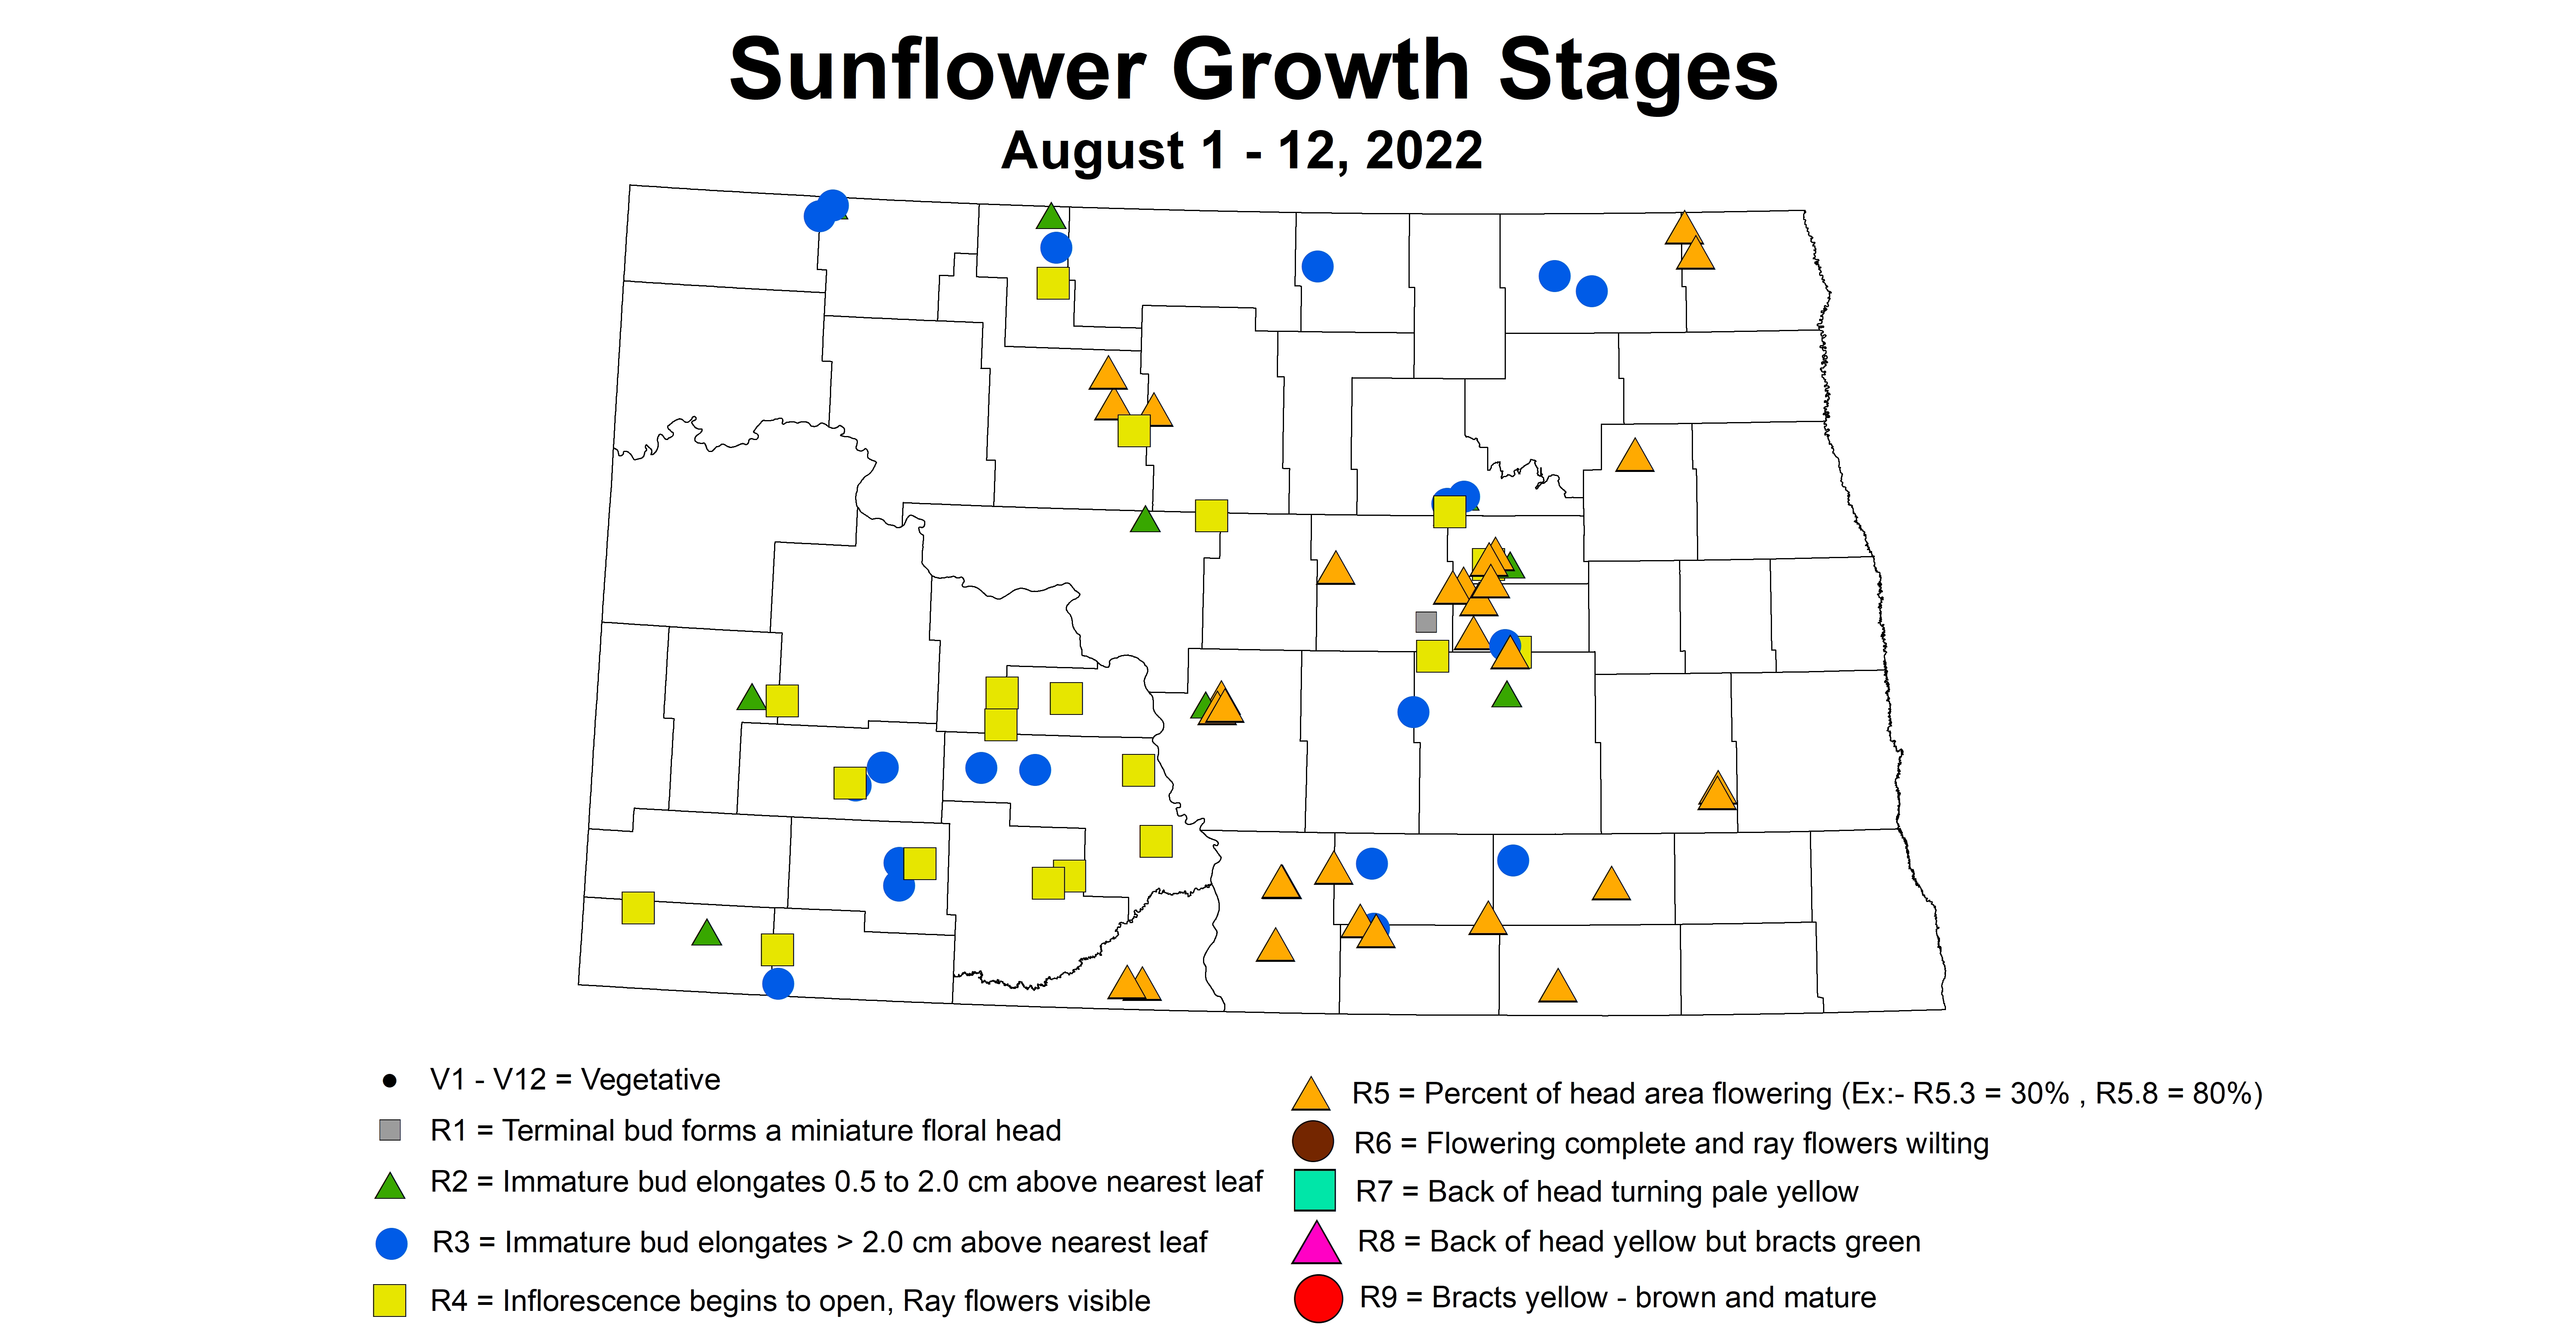 sunflower growth stages 2022 8.1-8.12